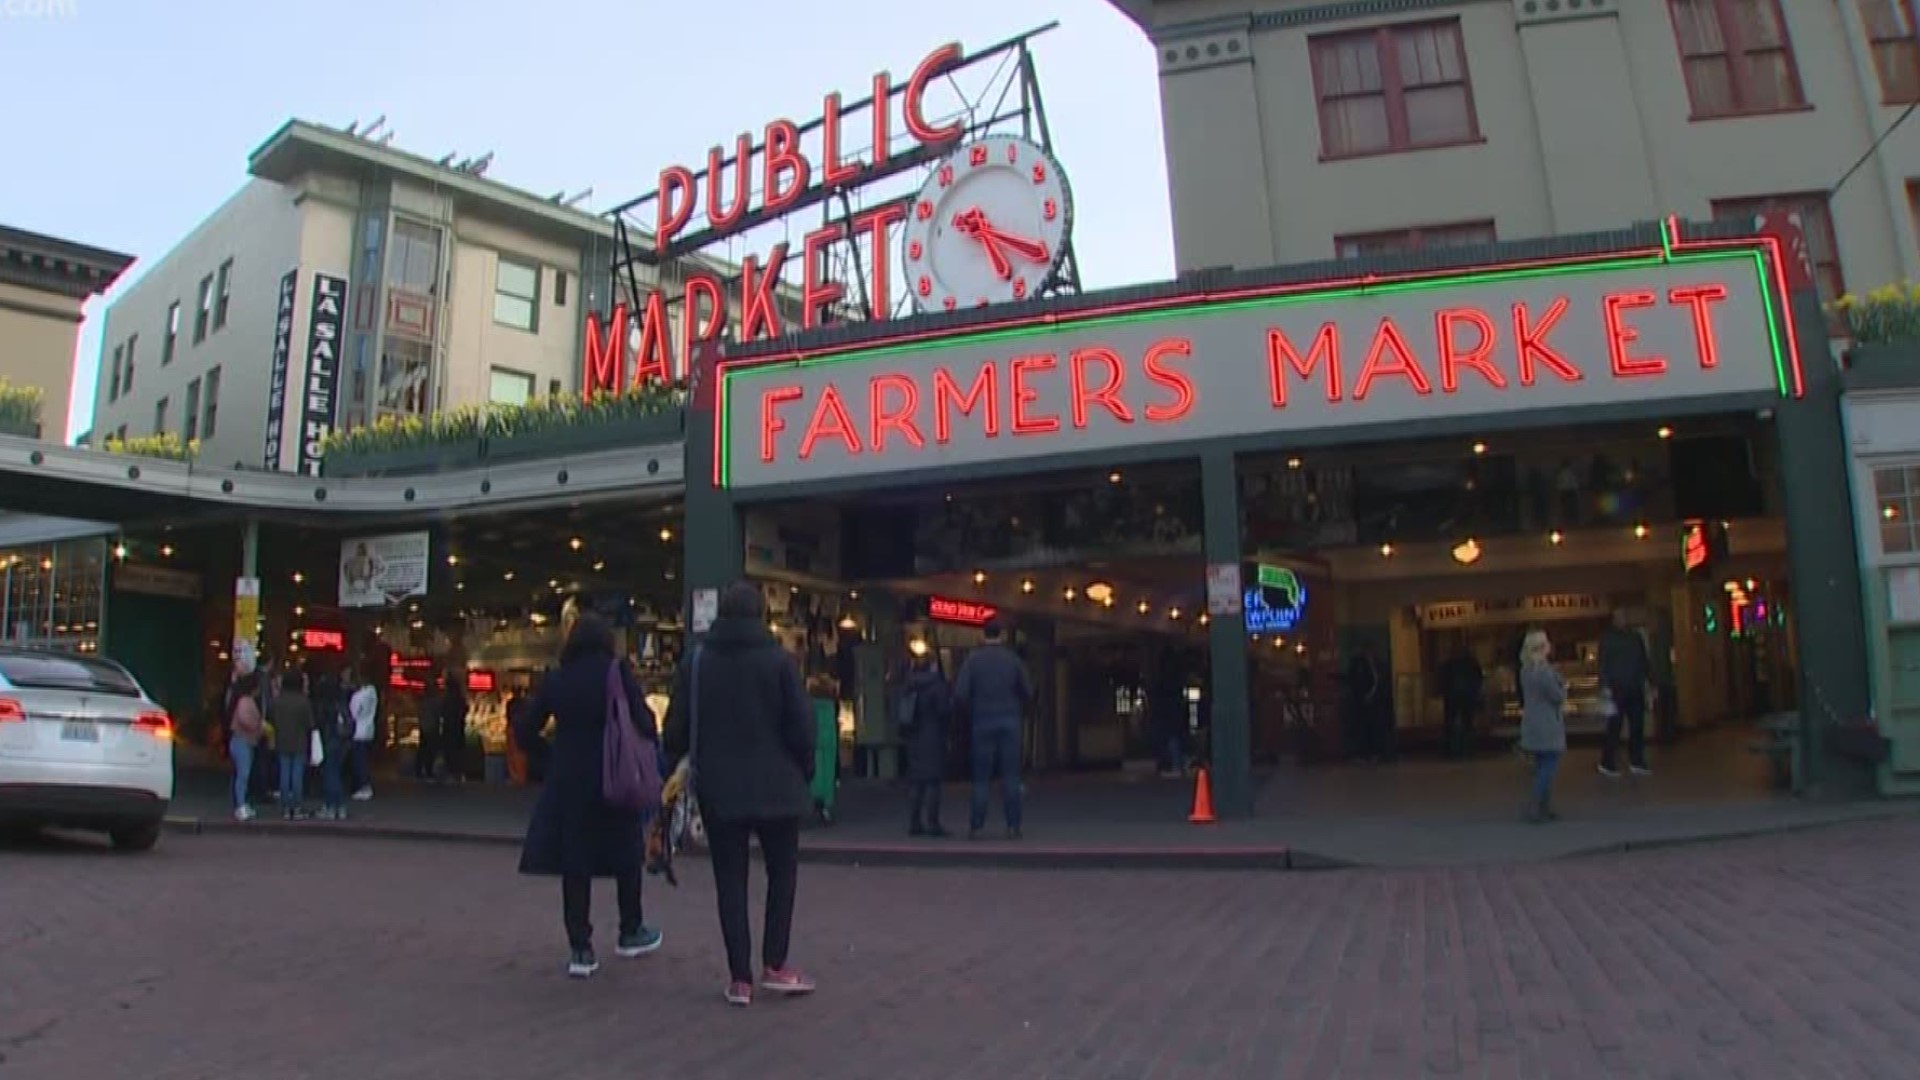 As coronavirus fears spread, are Seattle businesses suffering?  KING 5's Britt Moorer set out to find some answers.